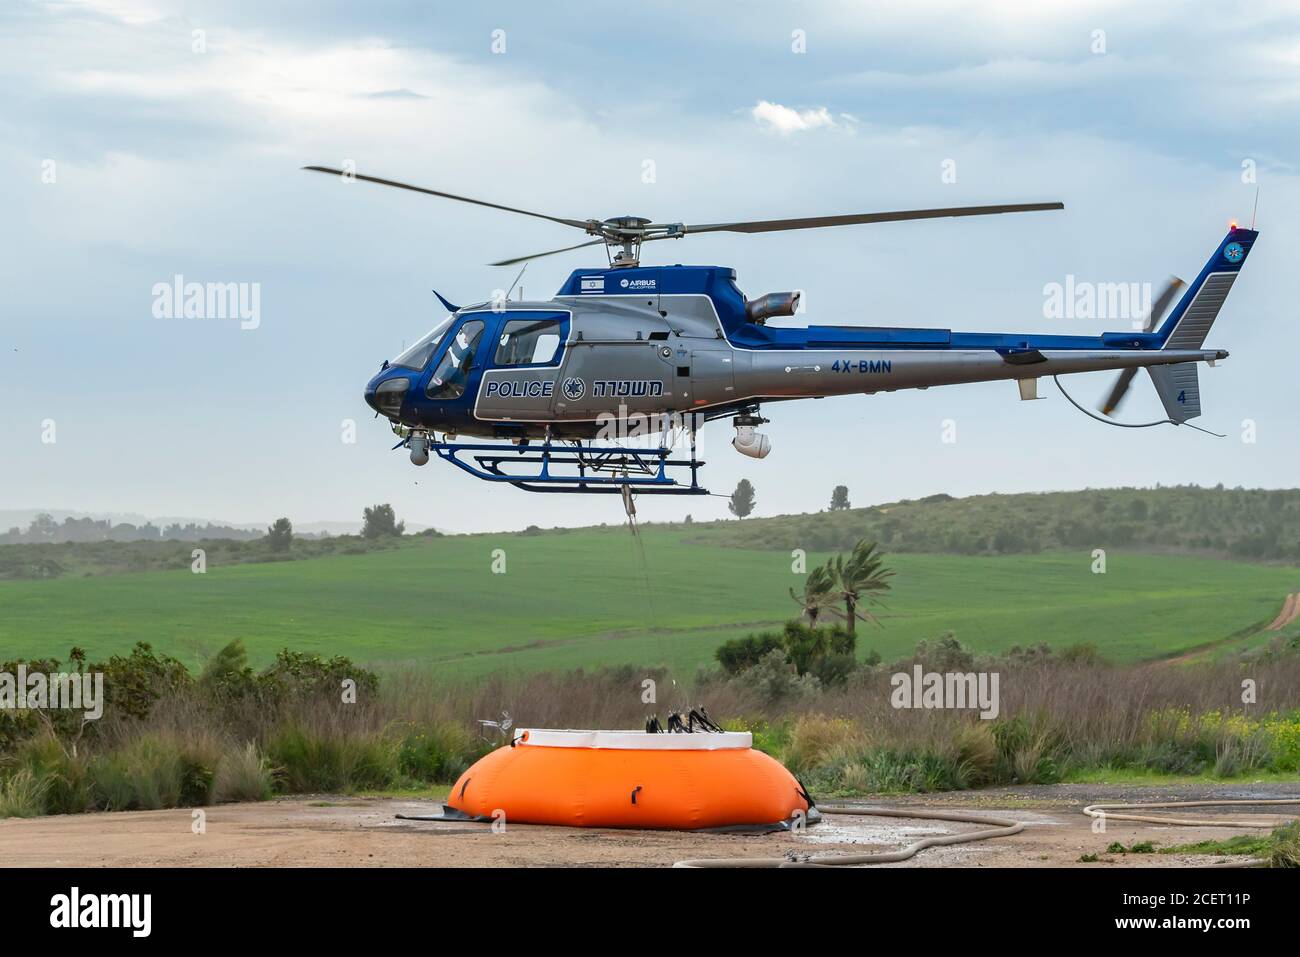 A police helicopter is used during a fire drill to airlift water to the fire zone. The water container is refilled from an inflatable pumpkin tank Stock Photo